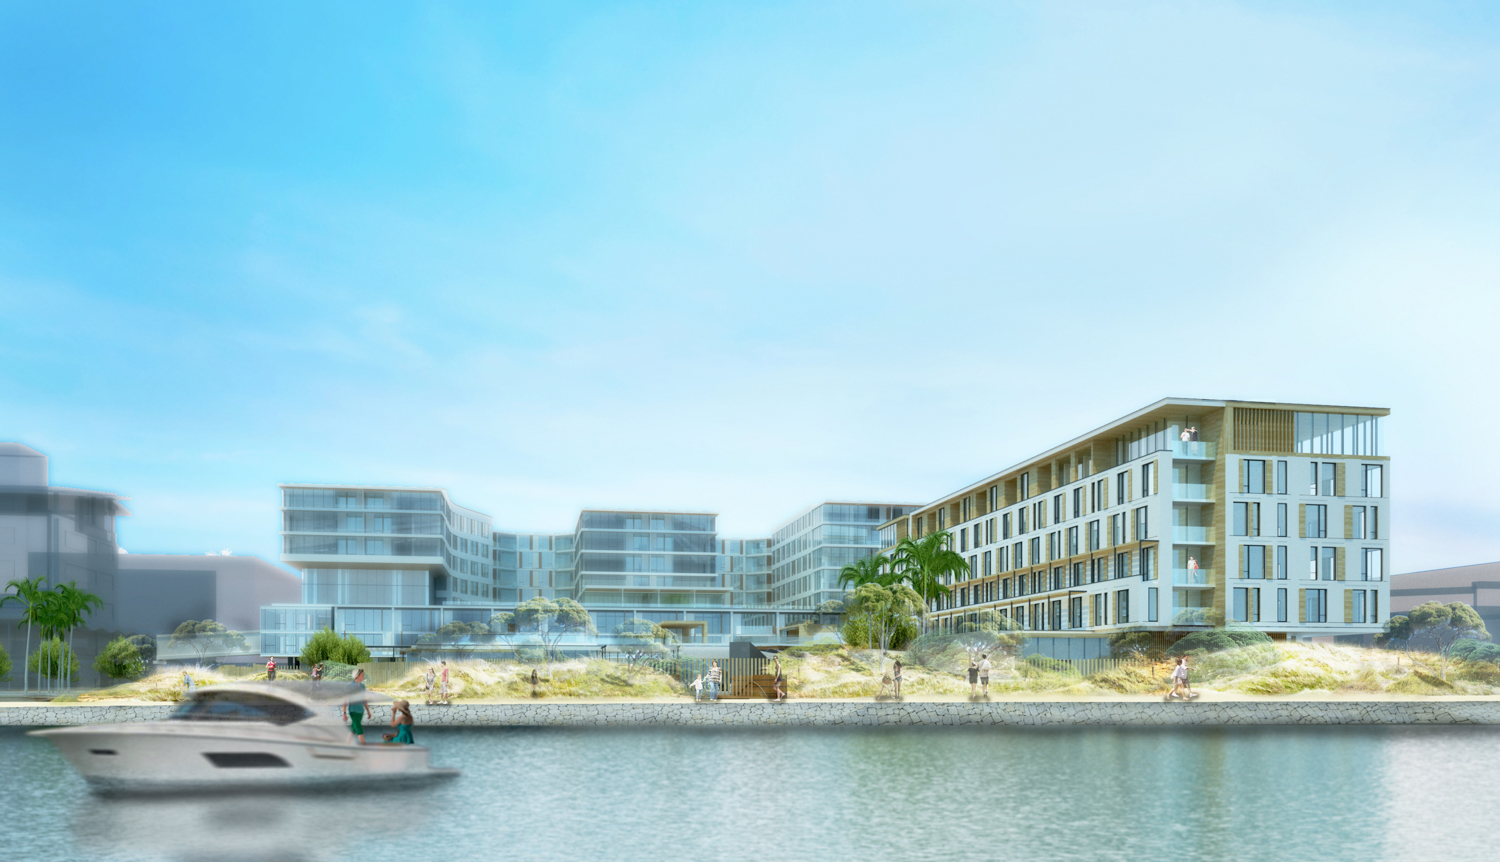 Jack London Square Parcel F3 water view, rendering by Solomon Cordwell Buenz